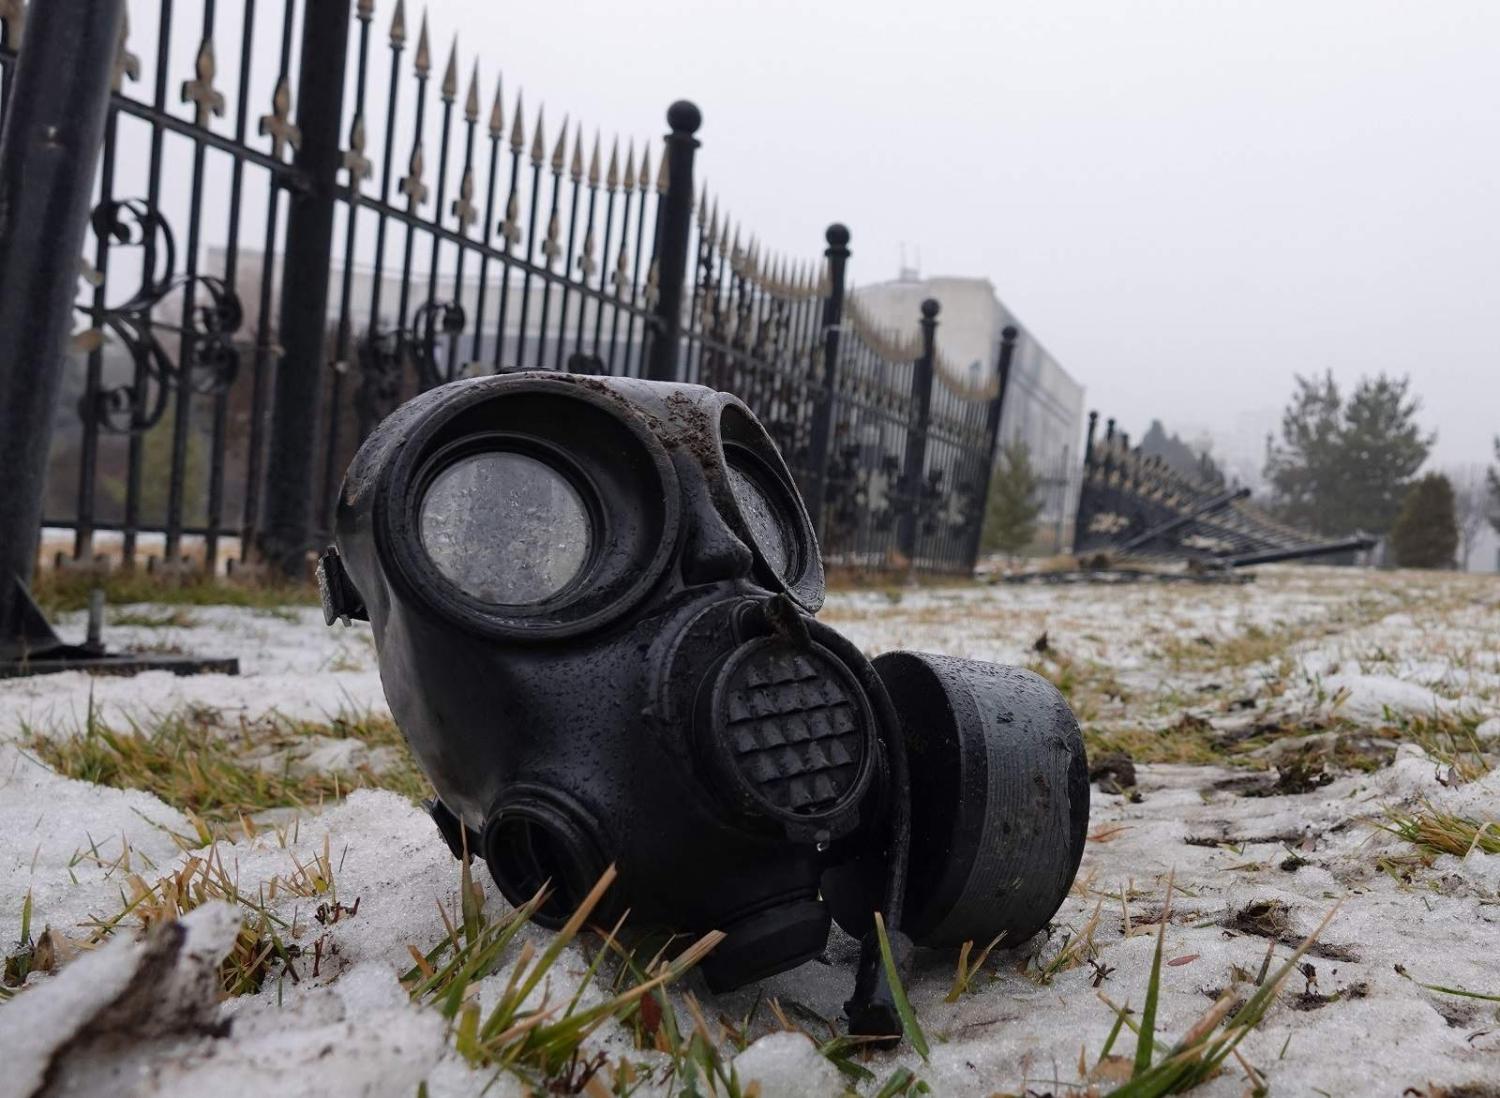 A gas mask in central Almaty is one of the few signs of protests that erupted over hikes in fuel prices, 7 January 2022 (Abduaziz Madyarov/AFP via Getty Images)